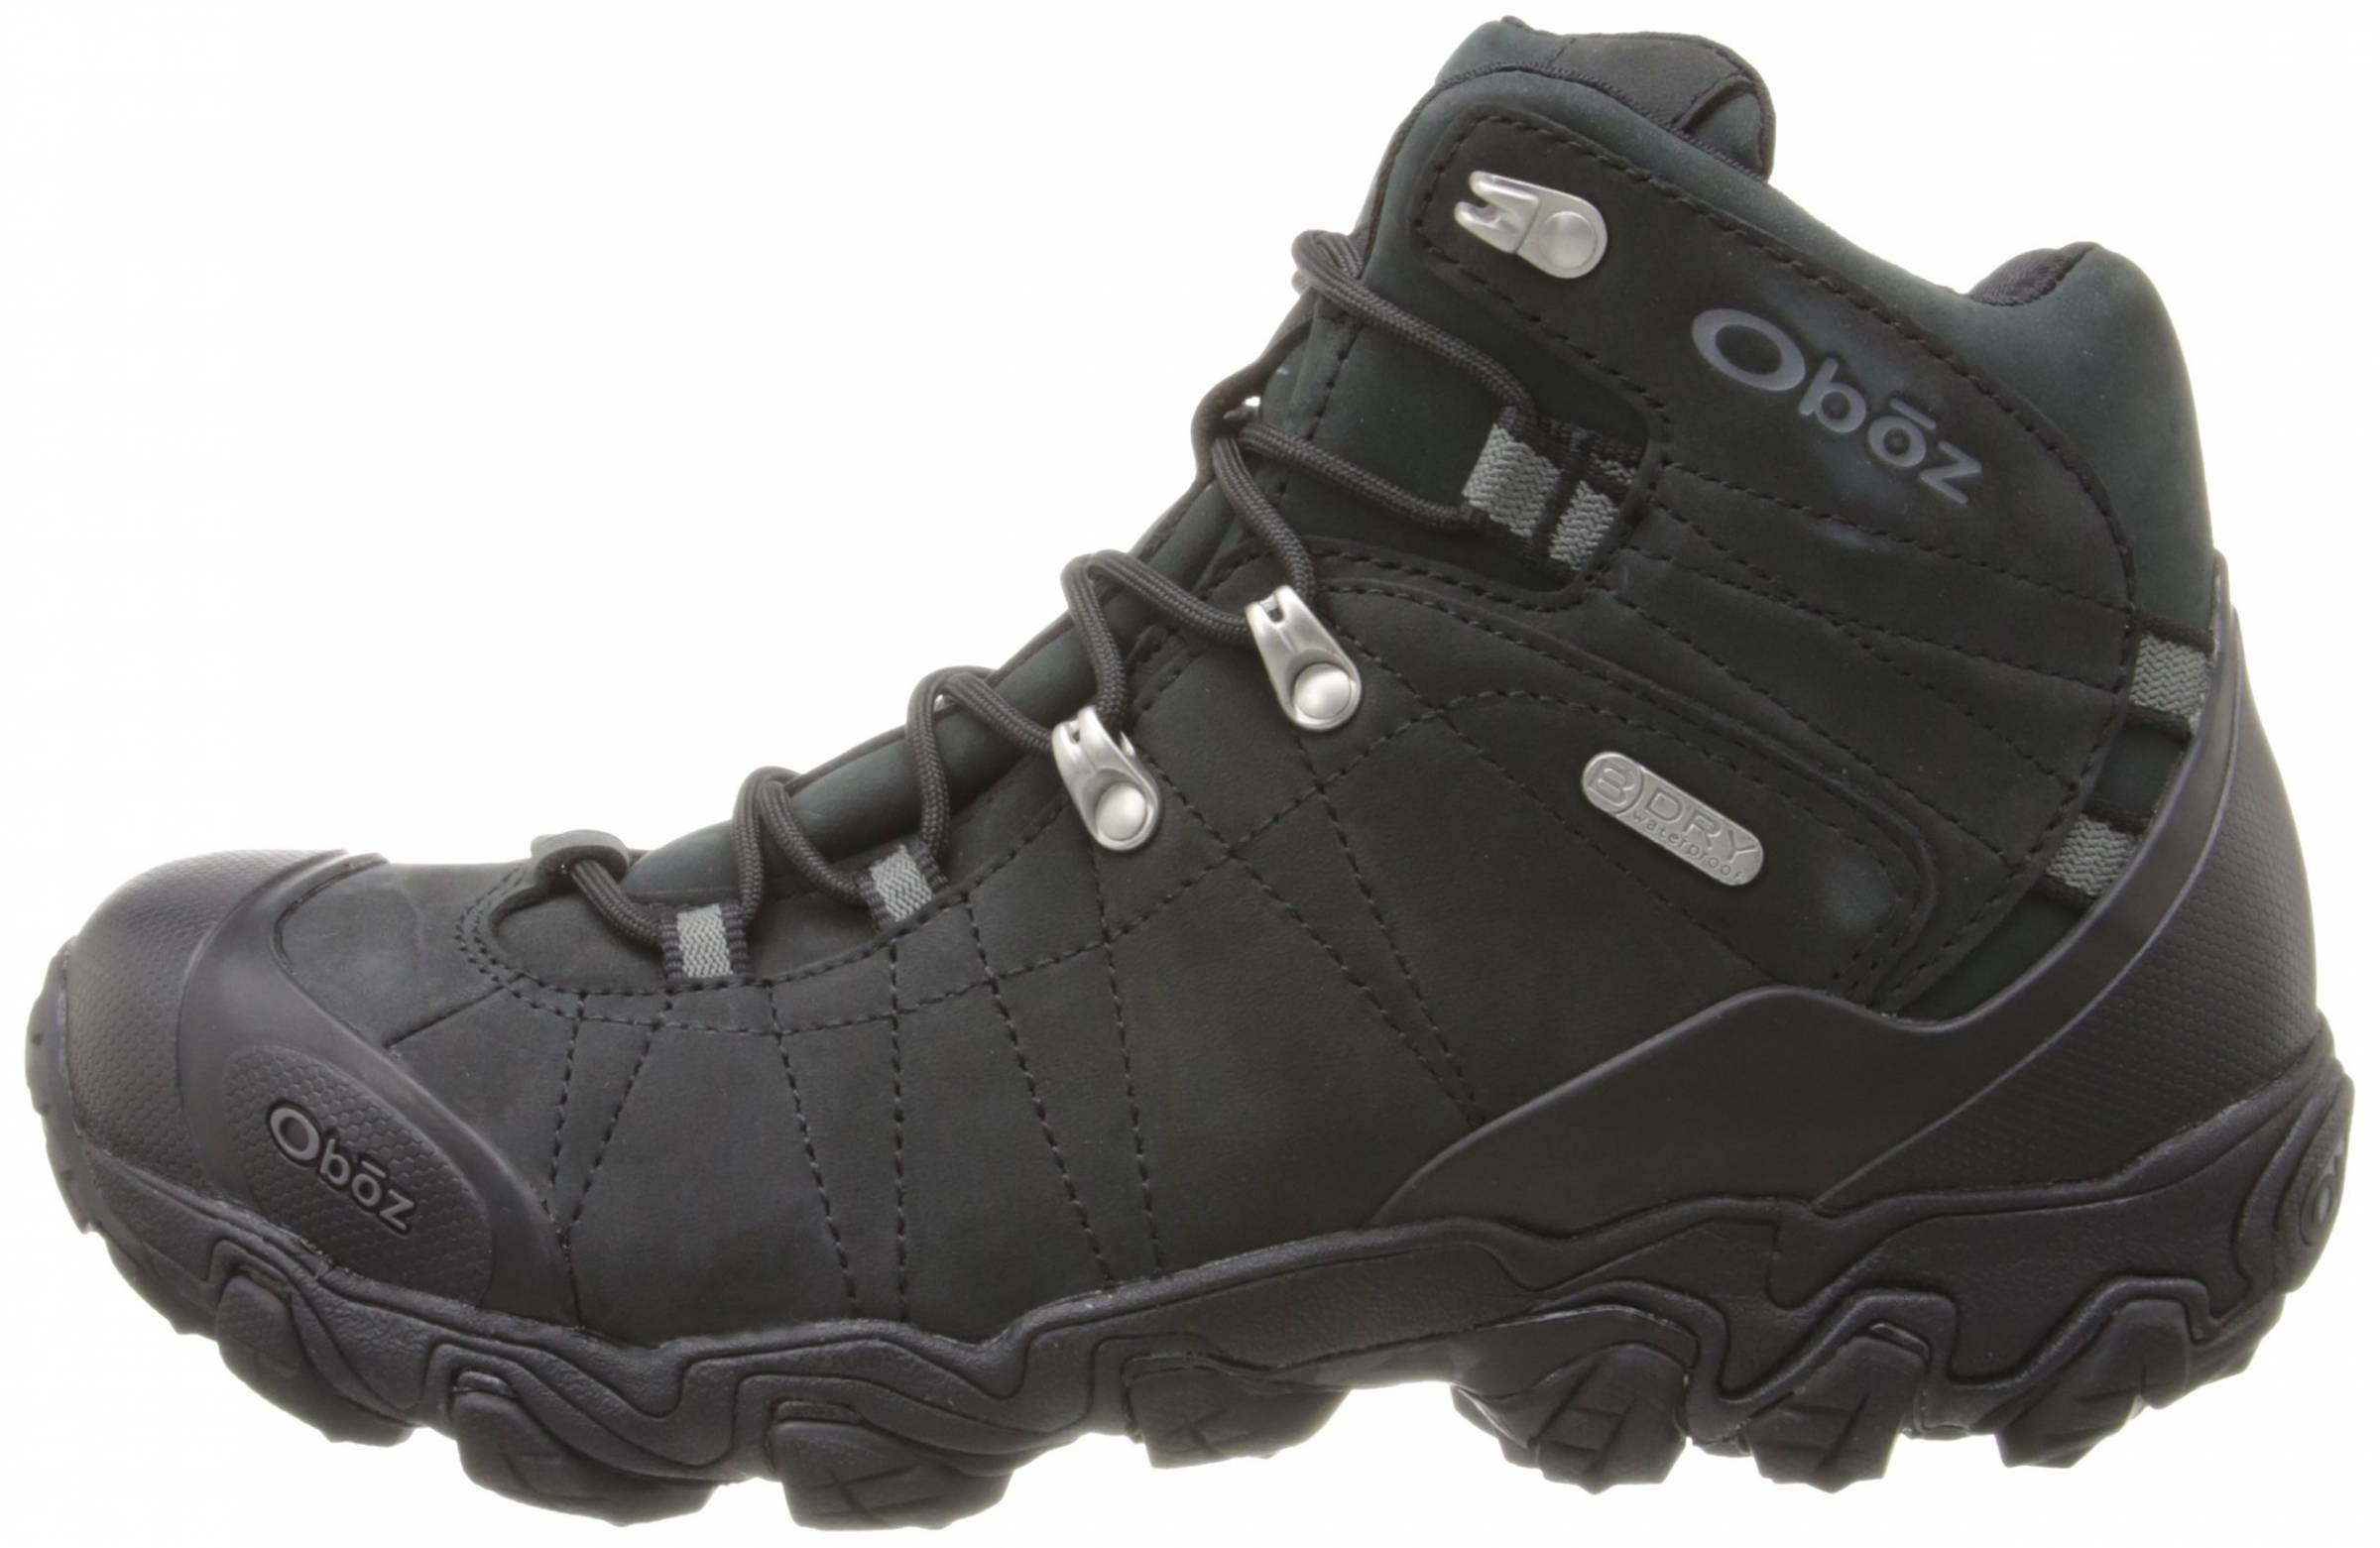 Save 16% on Oboz Hiking Boots (8 Models 